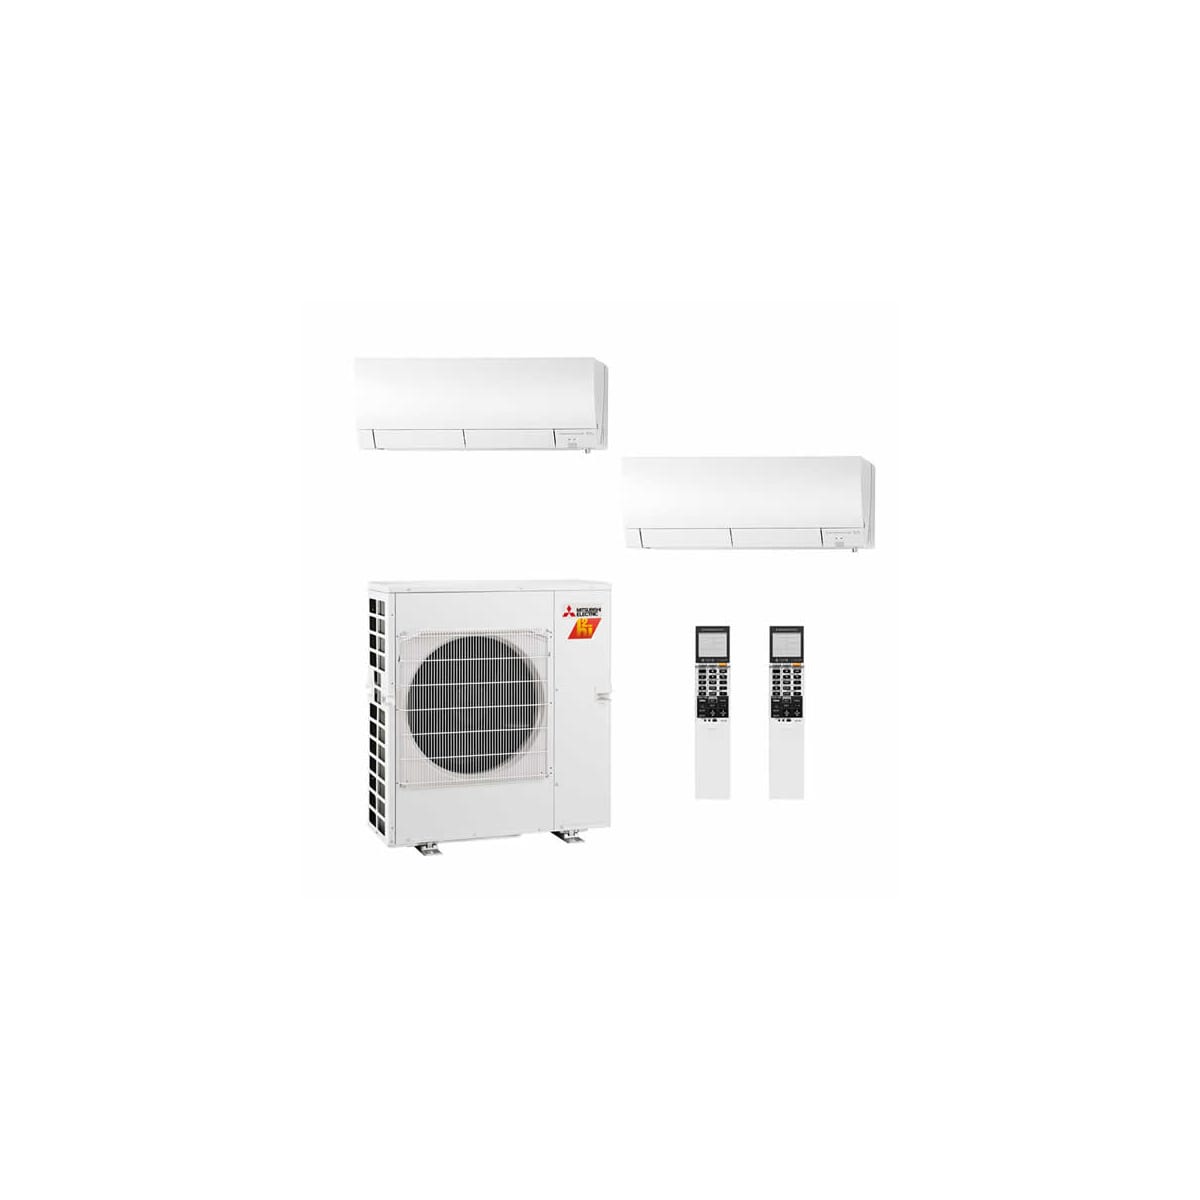 All Mitsubishi Wall Mounted Ductless Mini Split Systems Got Ductless